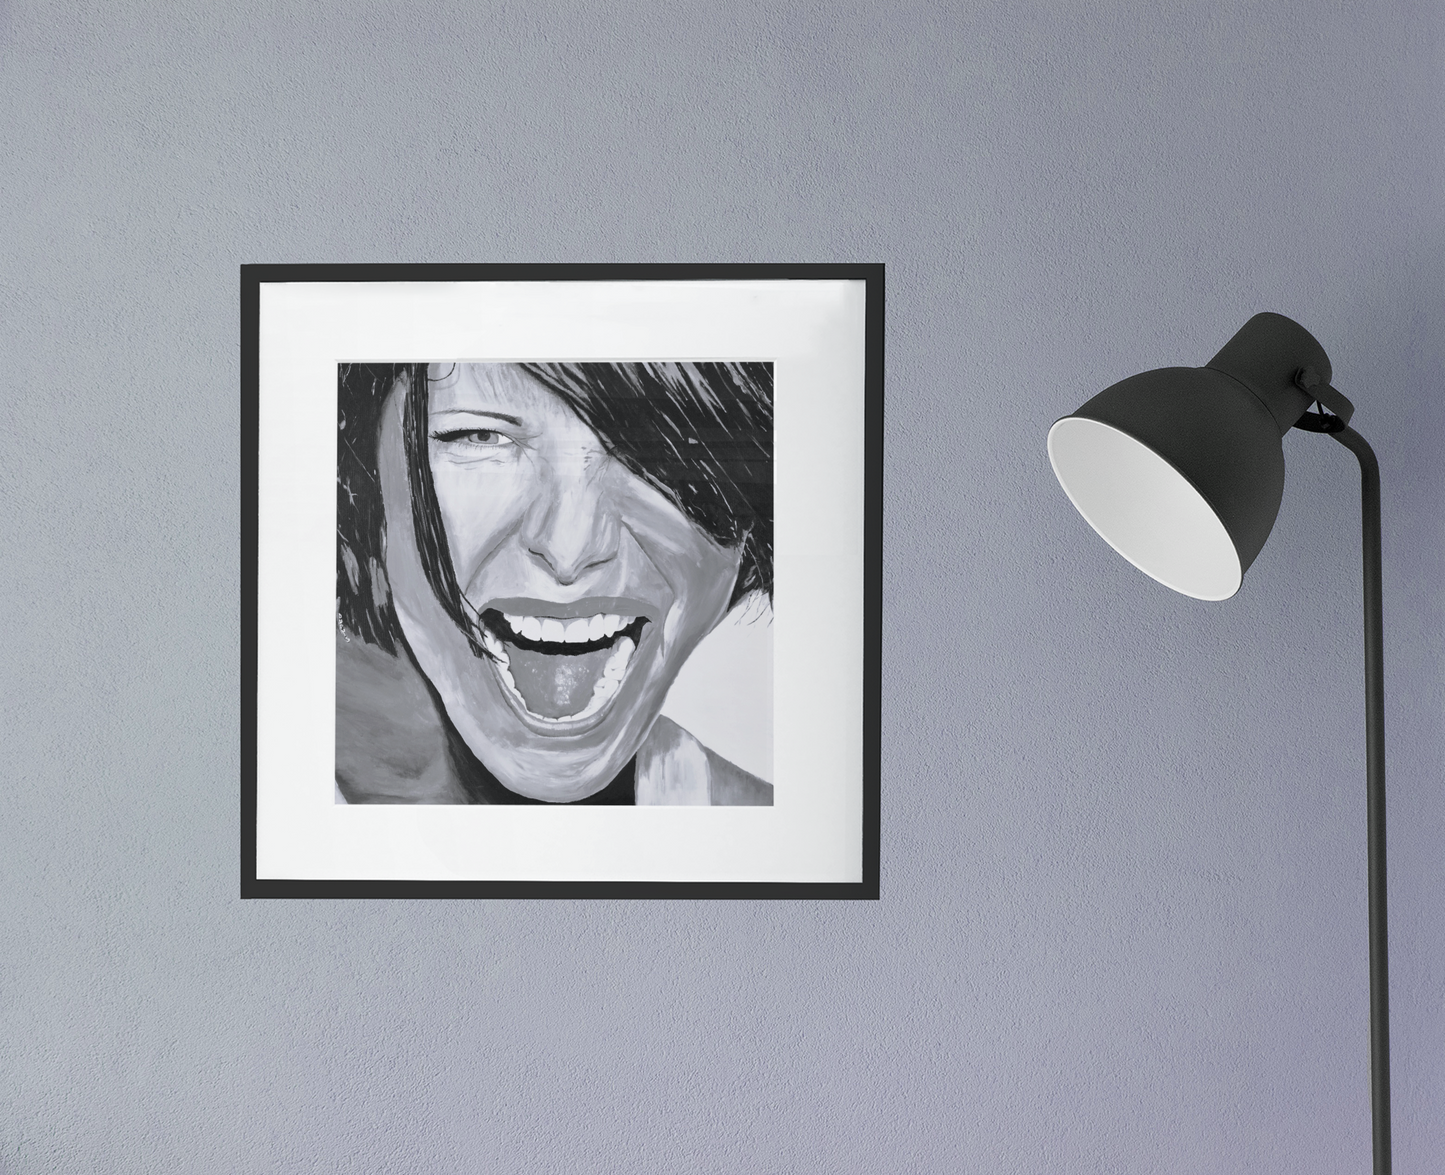 Black and White art print on canvas of a passionate woman showing emotion, framed in black with white matting, hanging on wall next to a lamp